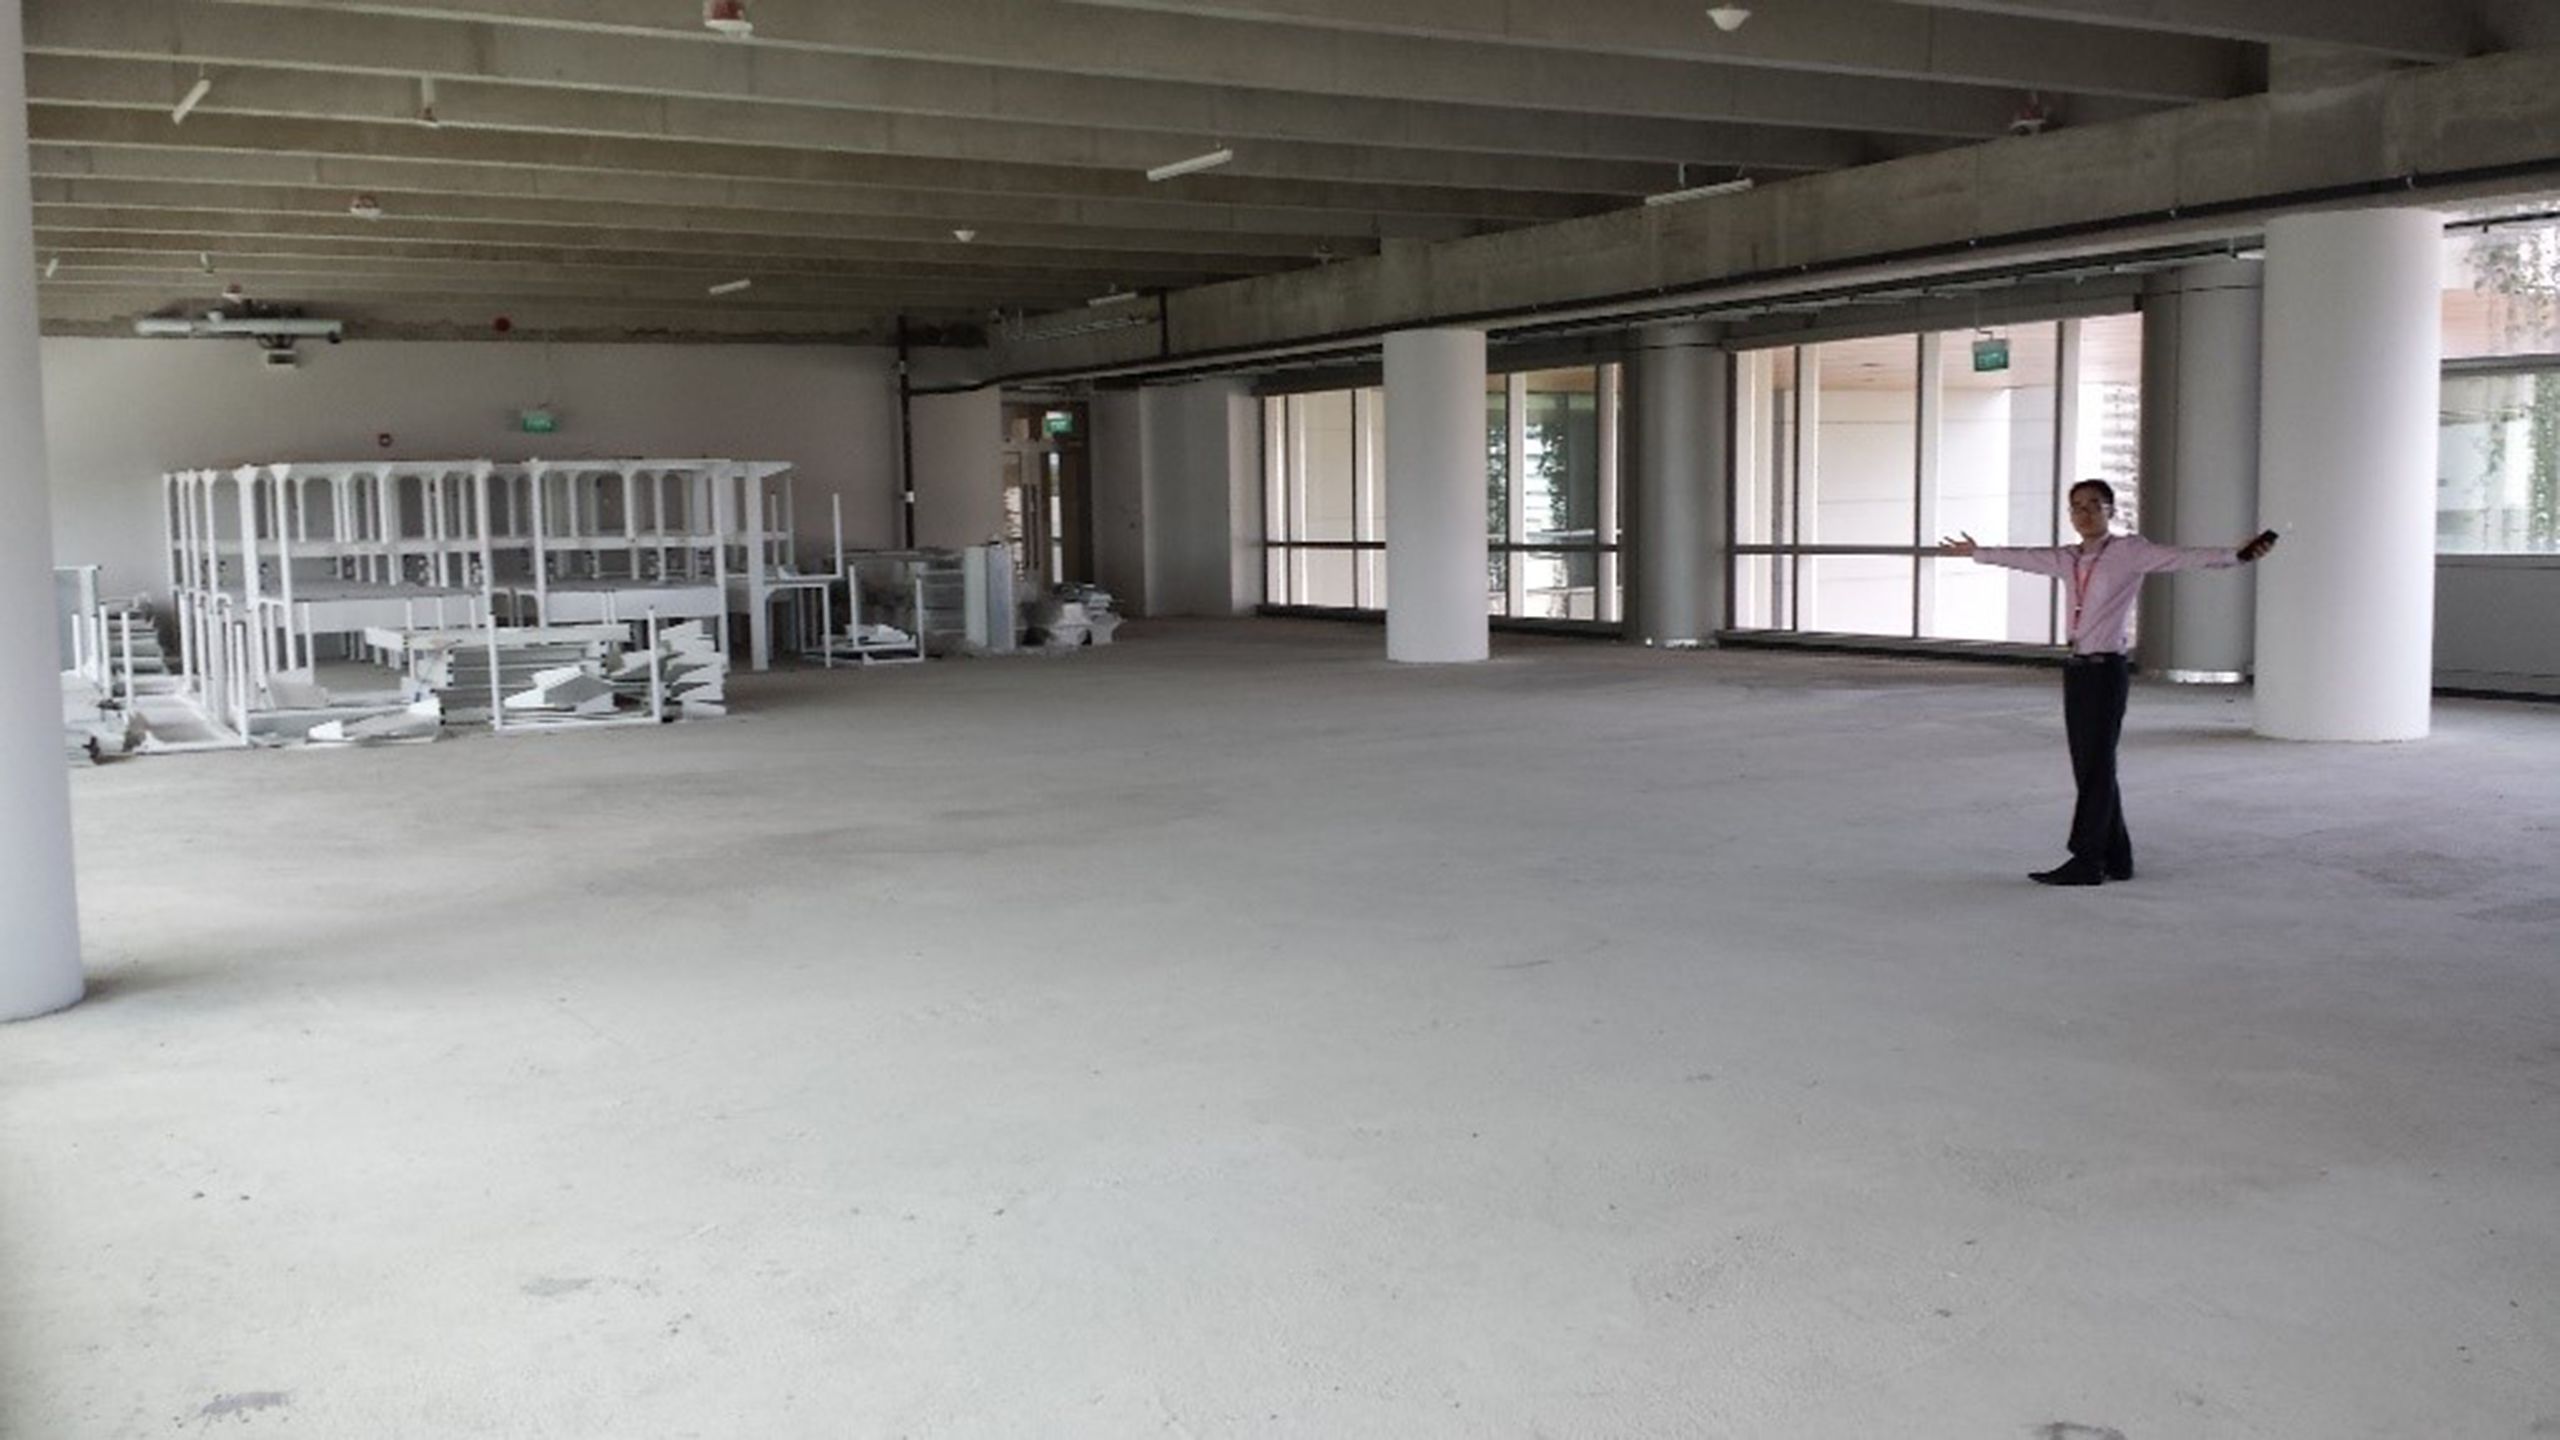 CARES laboratory before construction began in 2013